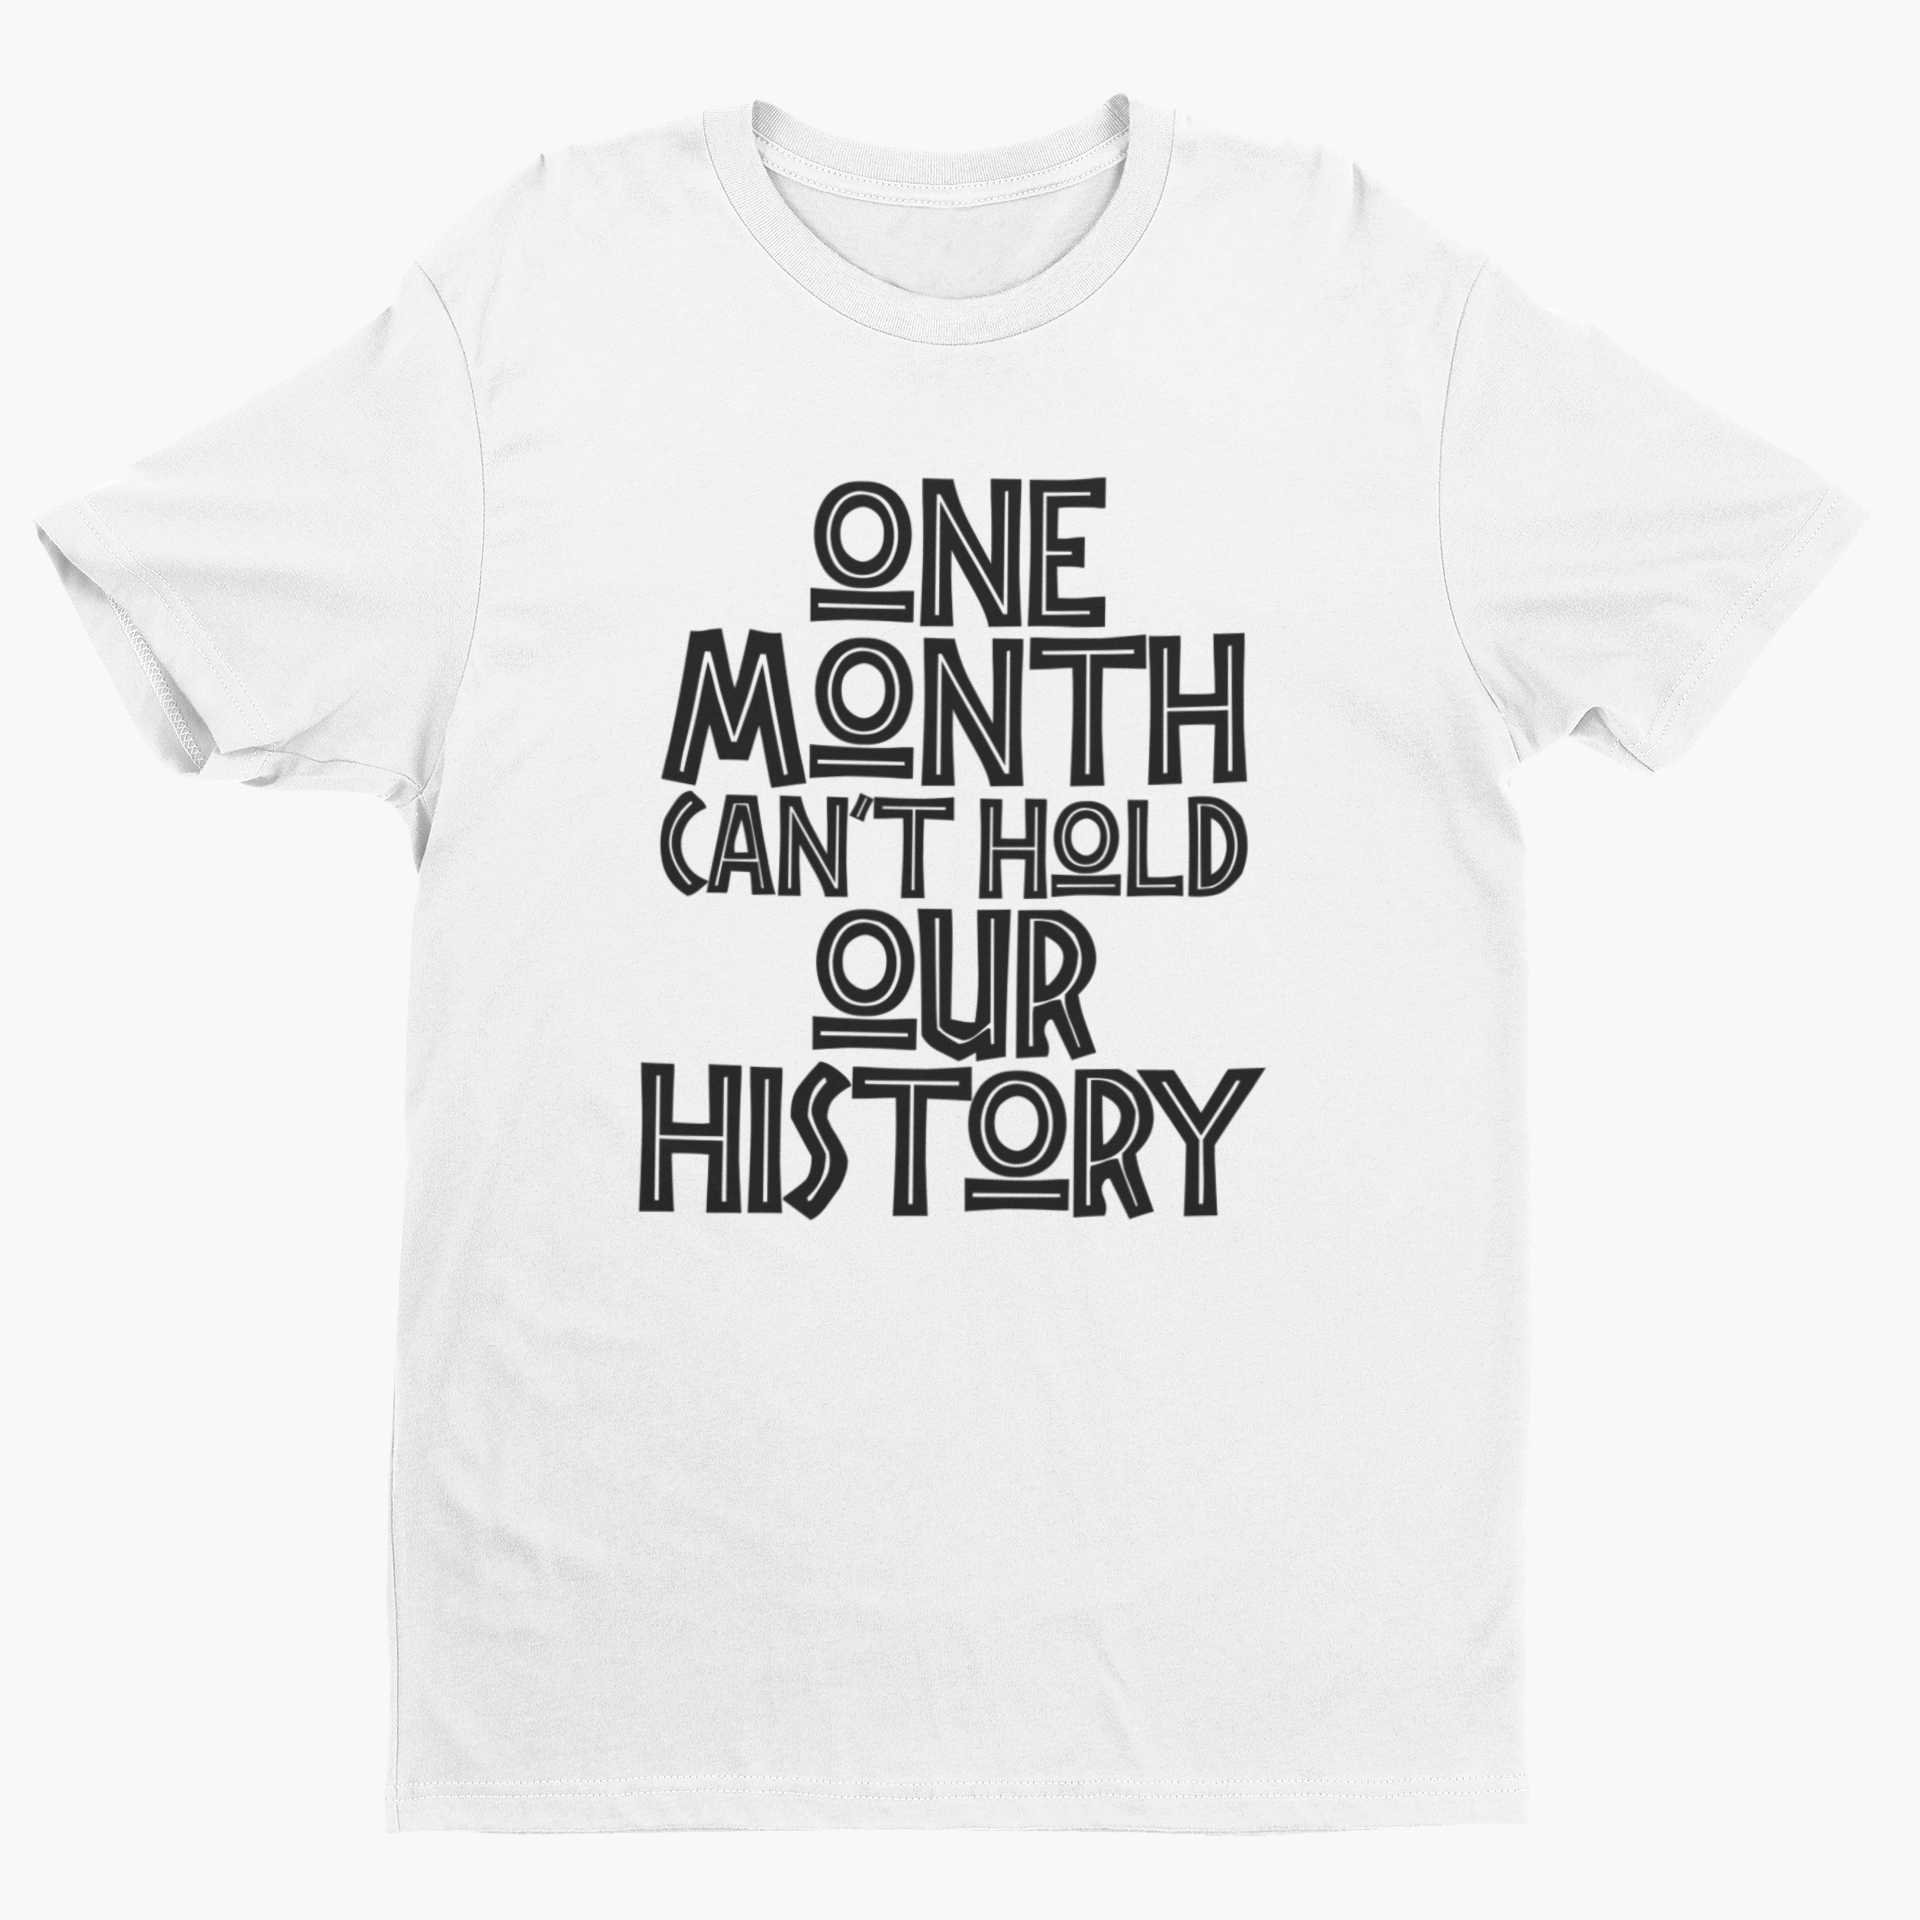 One Month Can't Hold Our History Unisex Short Sleeve Shirt-clothing and culture-shop here at-A Perfect Shirt